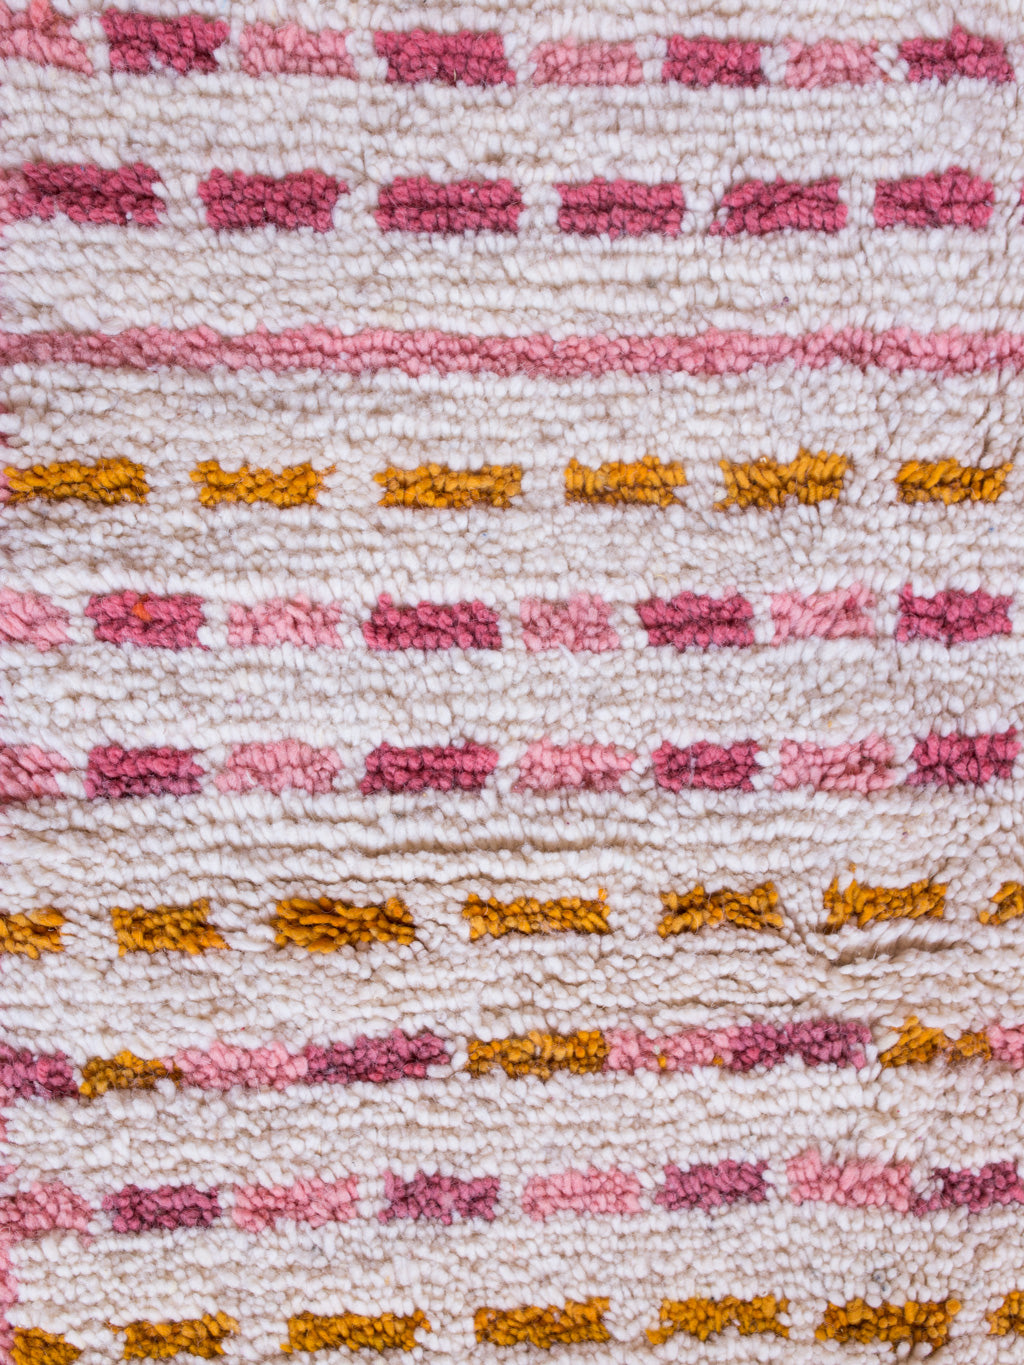 Colorful Pink Striped Shag Rug